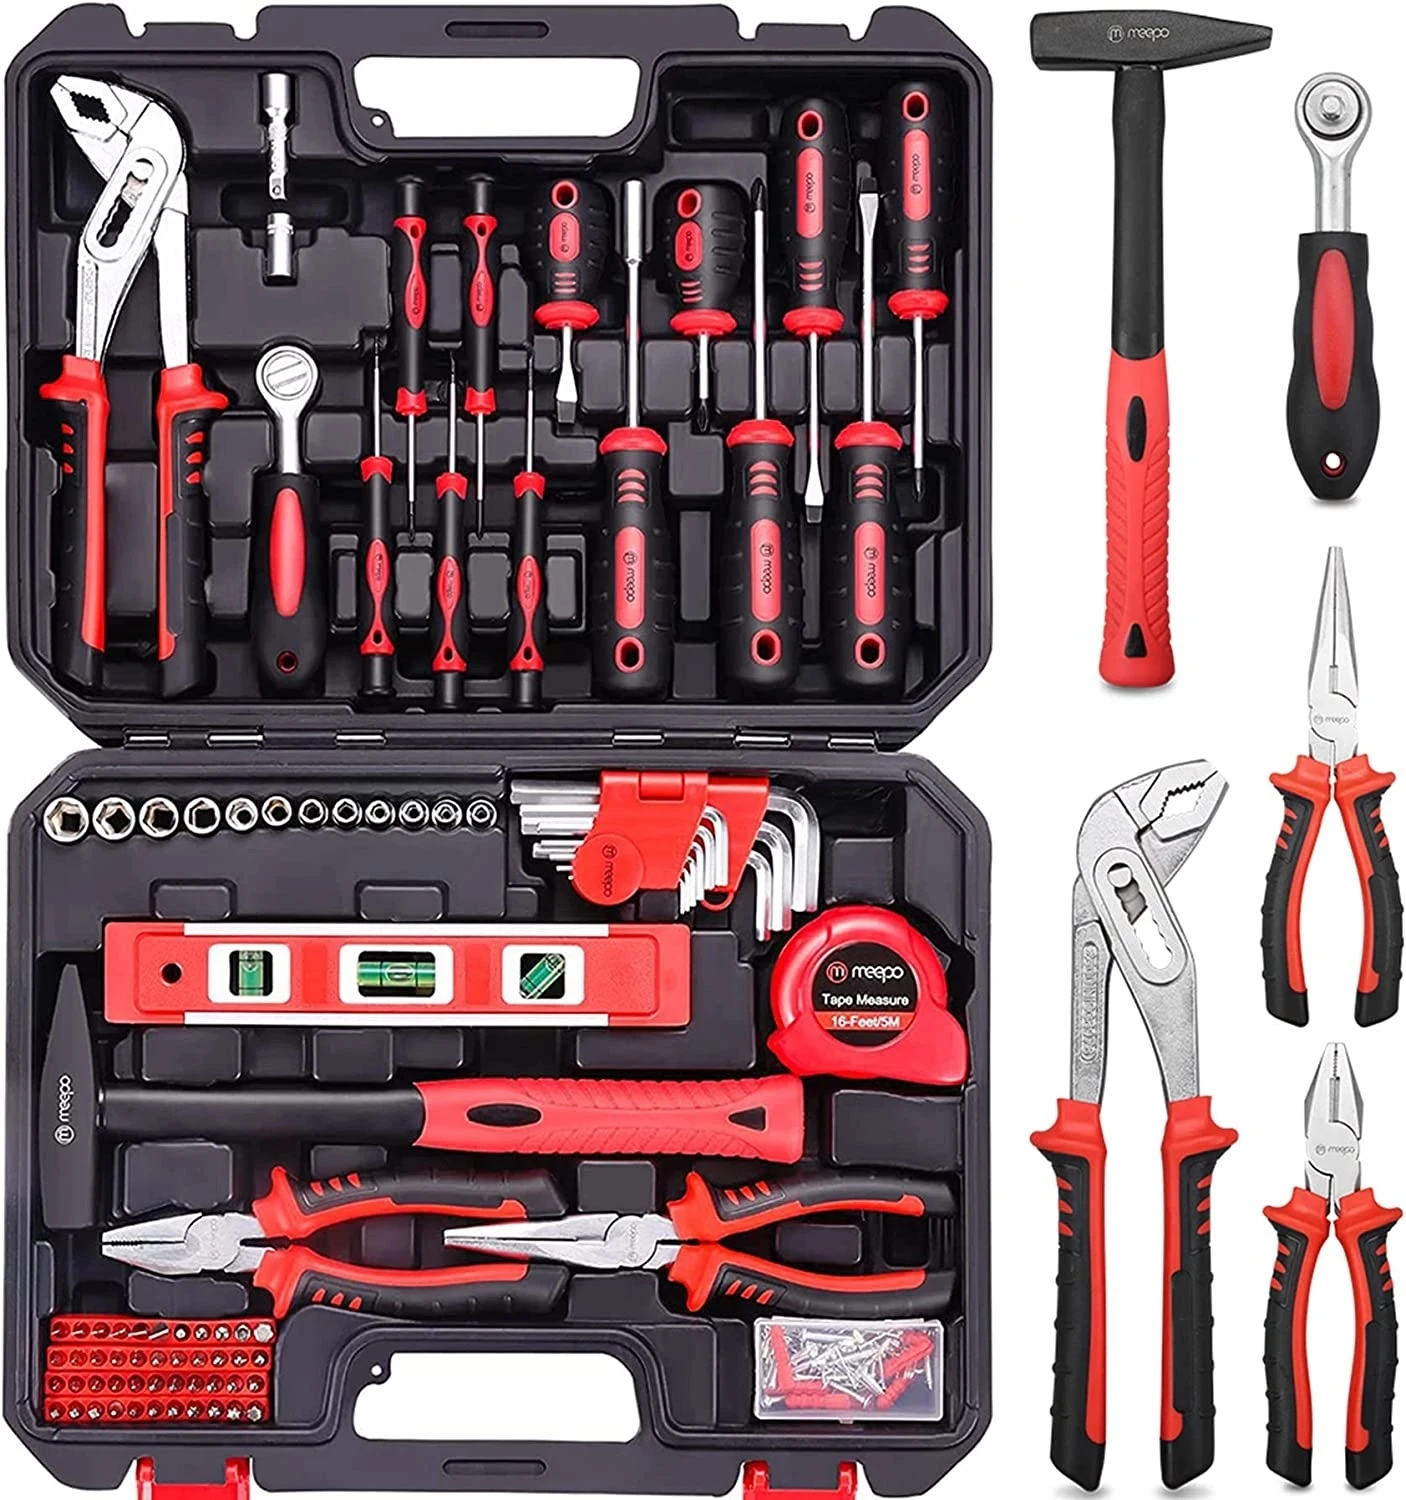 

2023 New low price Basics Household Tool Kit with Tool Storage Case 142 Piece